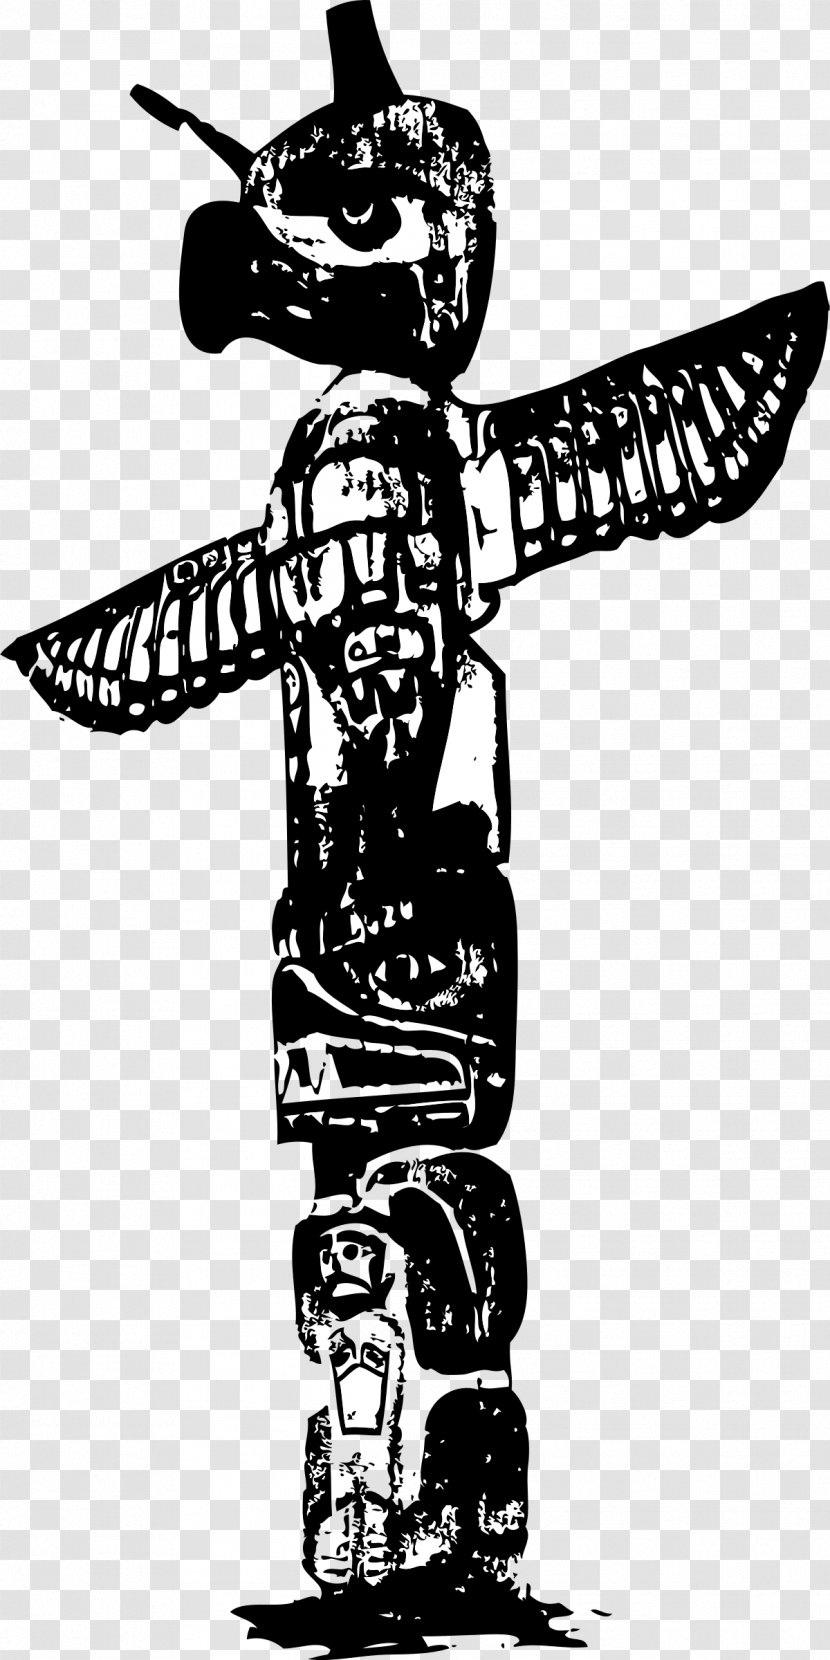 Totem Pole Native Americans In The United States Indigenous Peoples Of Americas Tribe - Monochrome - American Transparent PNG